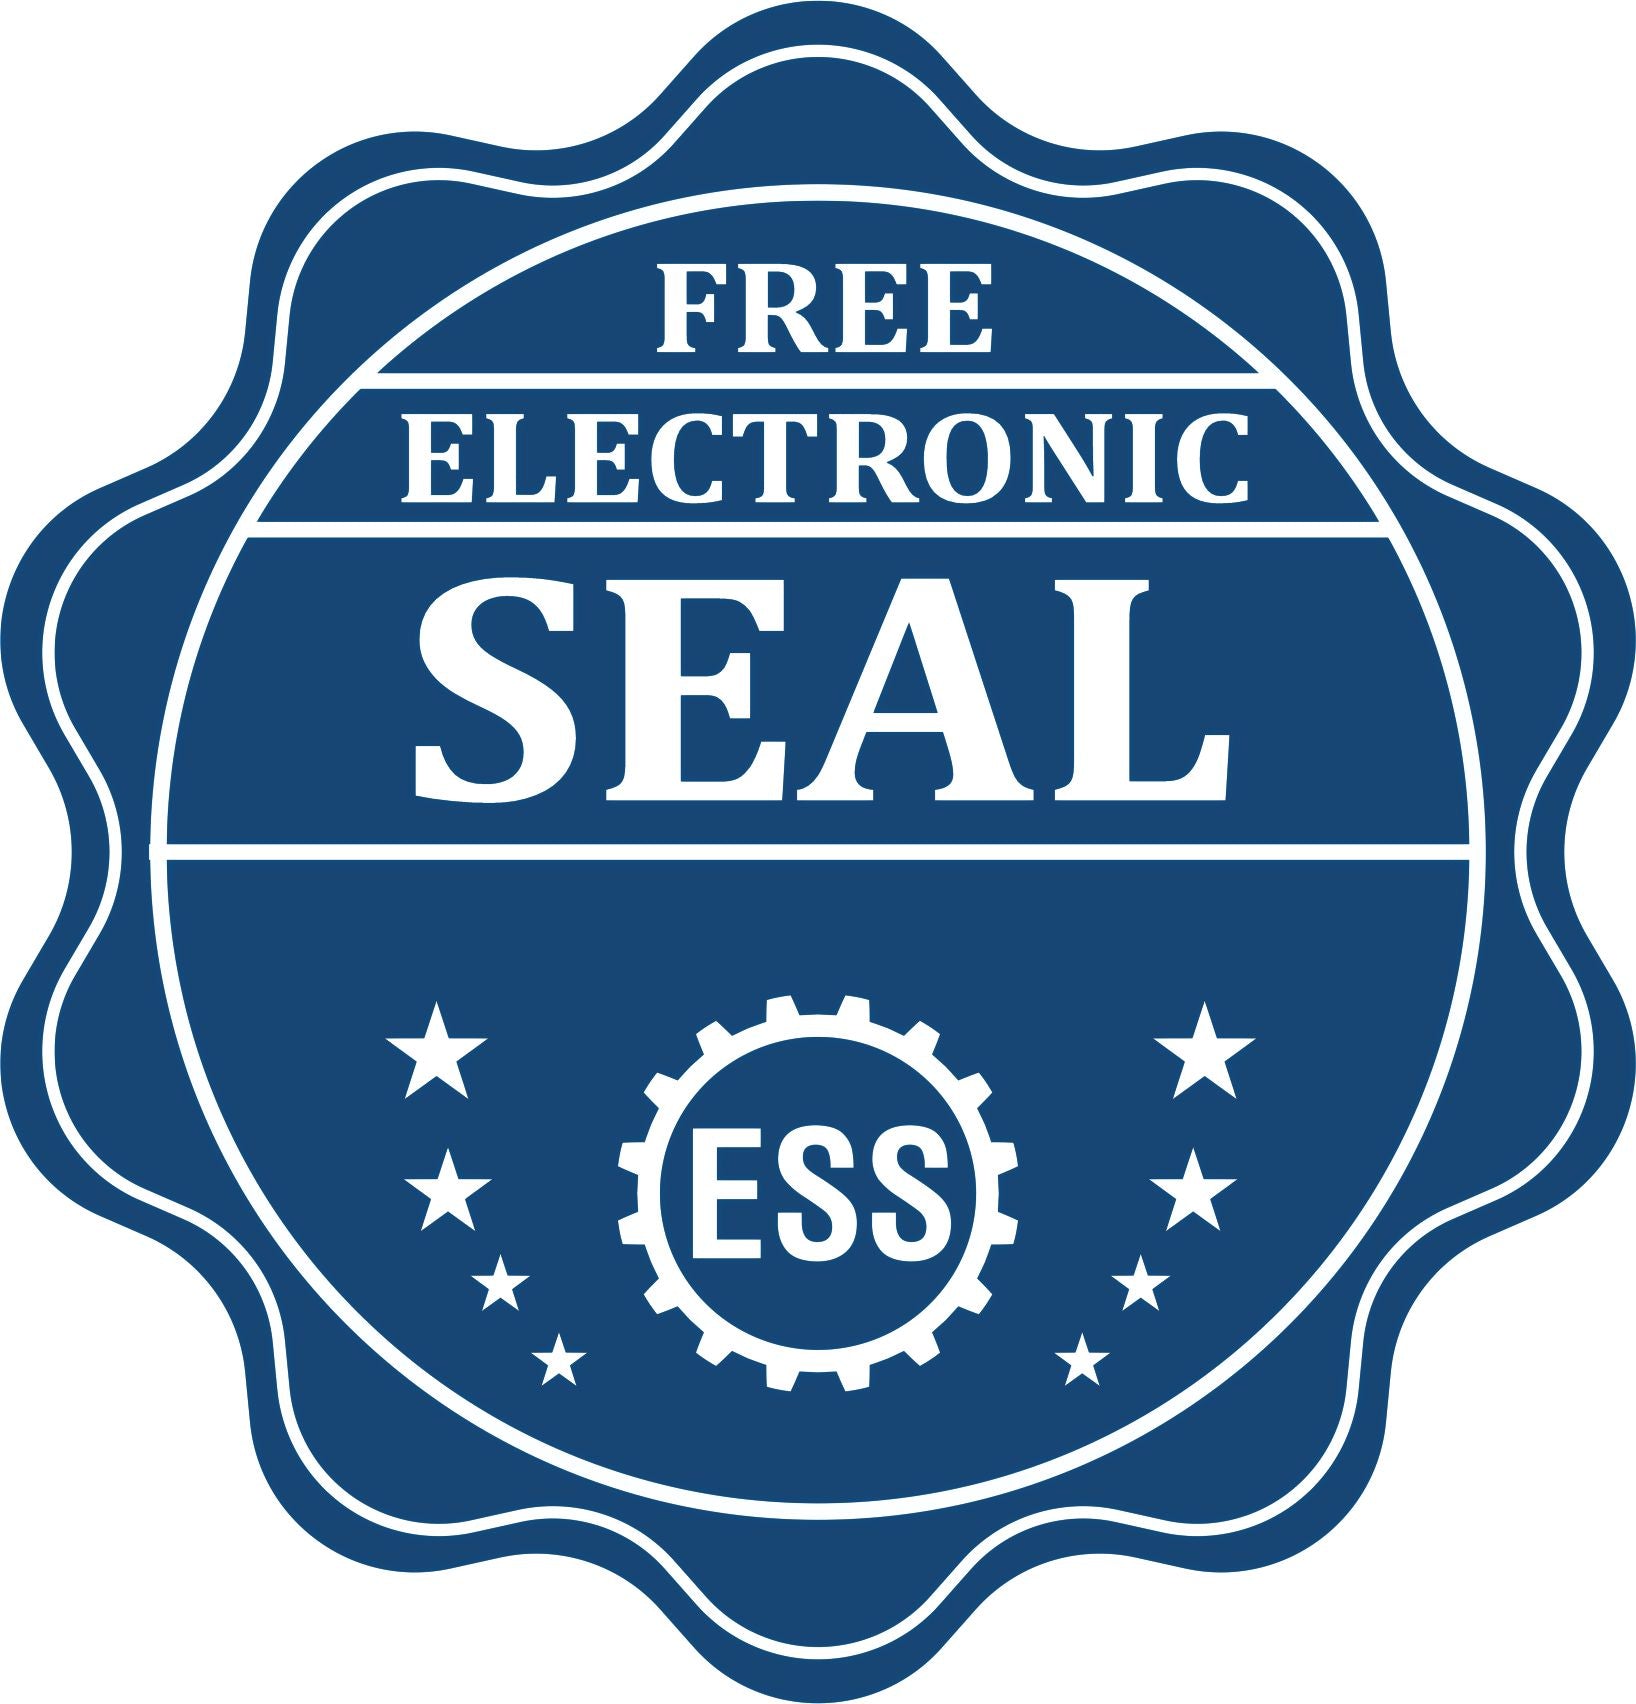 A badge showing a free electronic seal for the New Mexico Desk Surveyor Seal Embosser with stars and the ESS gear on the emblem.